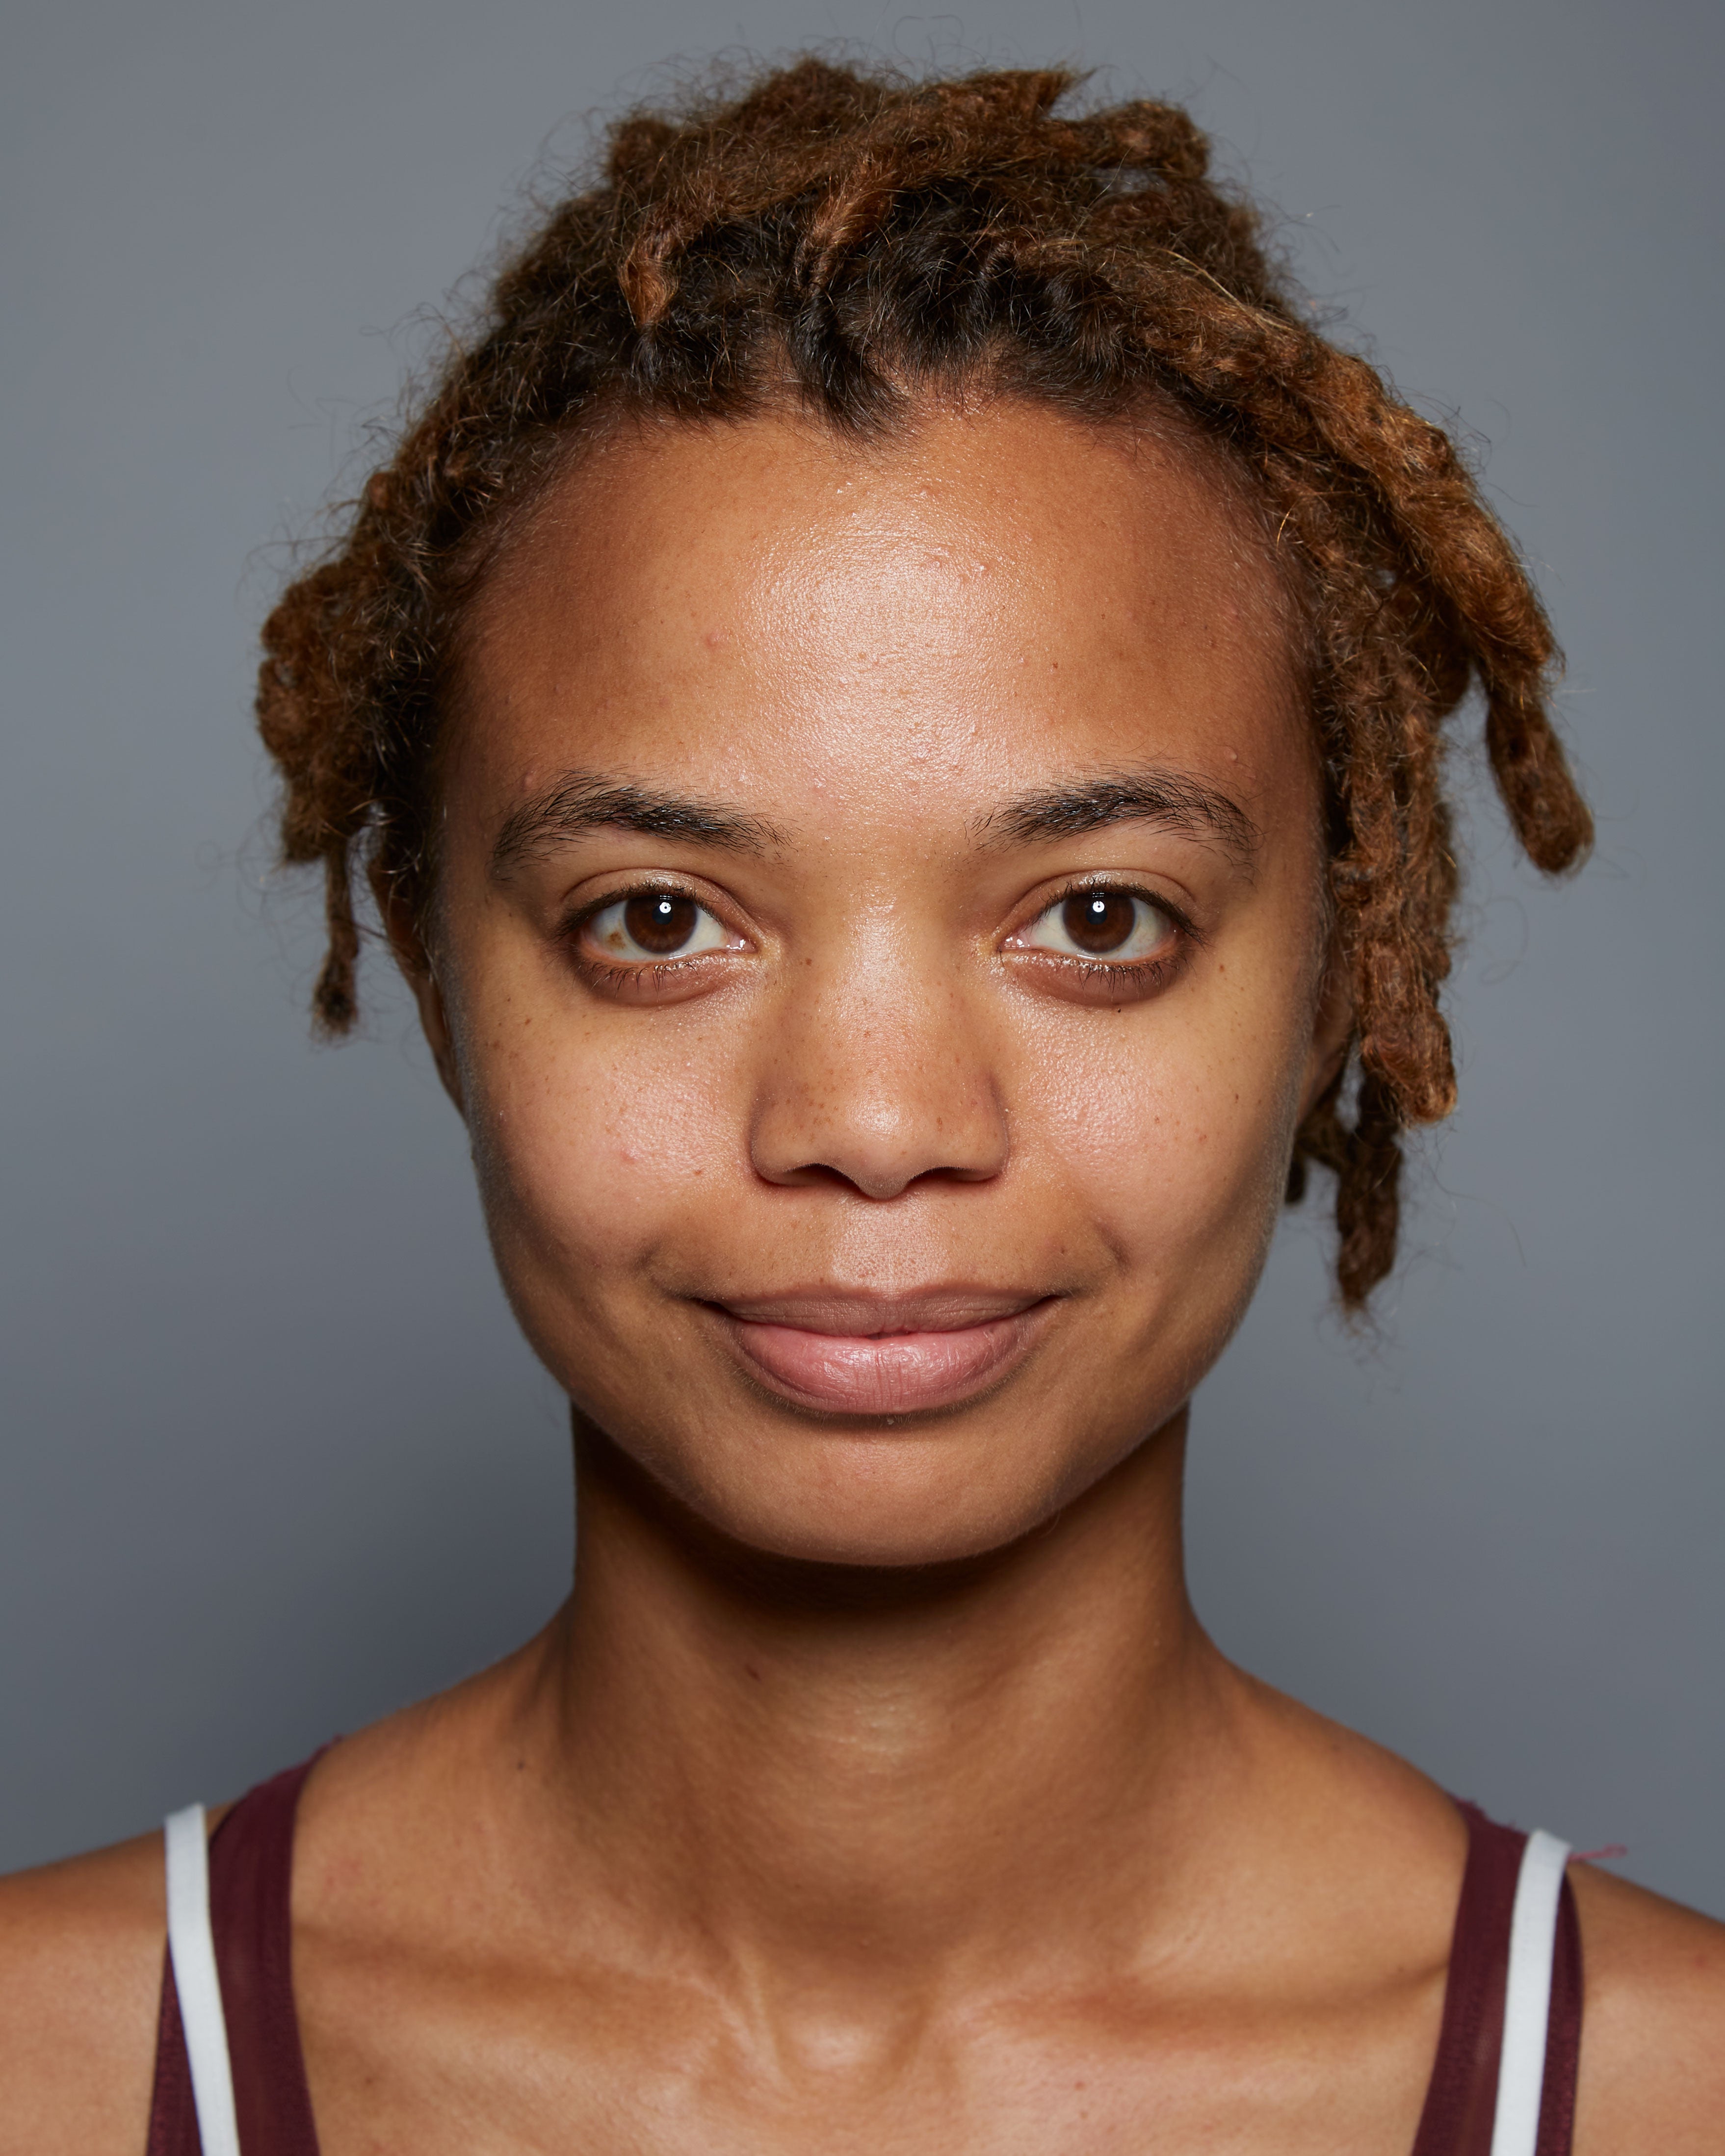 "After" headshot of a clinical subject who has used Michal Morrison Genesis BSTEM6 Molecular Serum, showing a young African-American woman with brown hair smiling at camera.